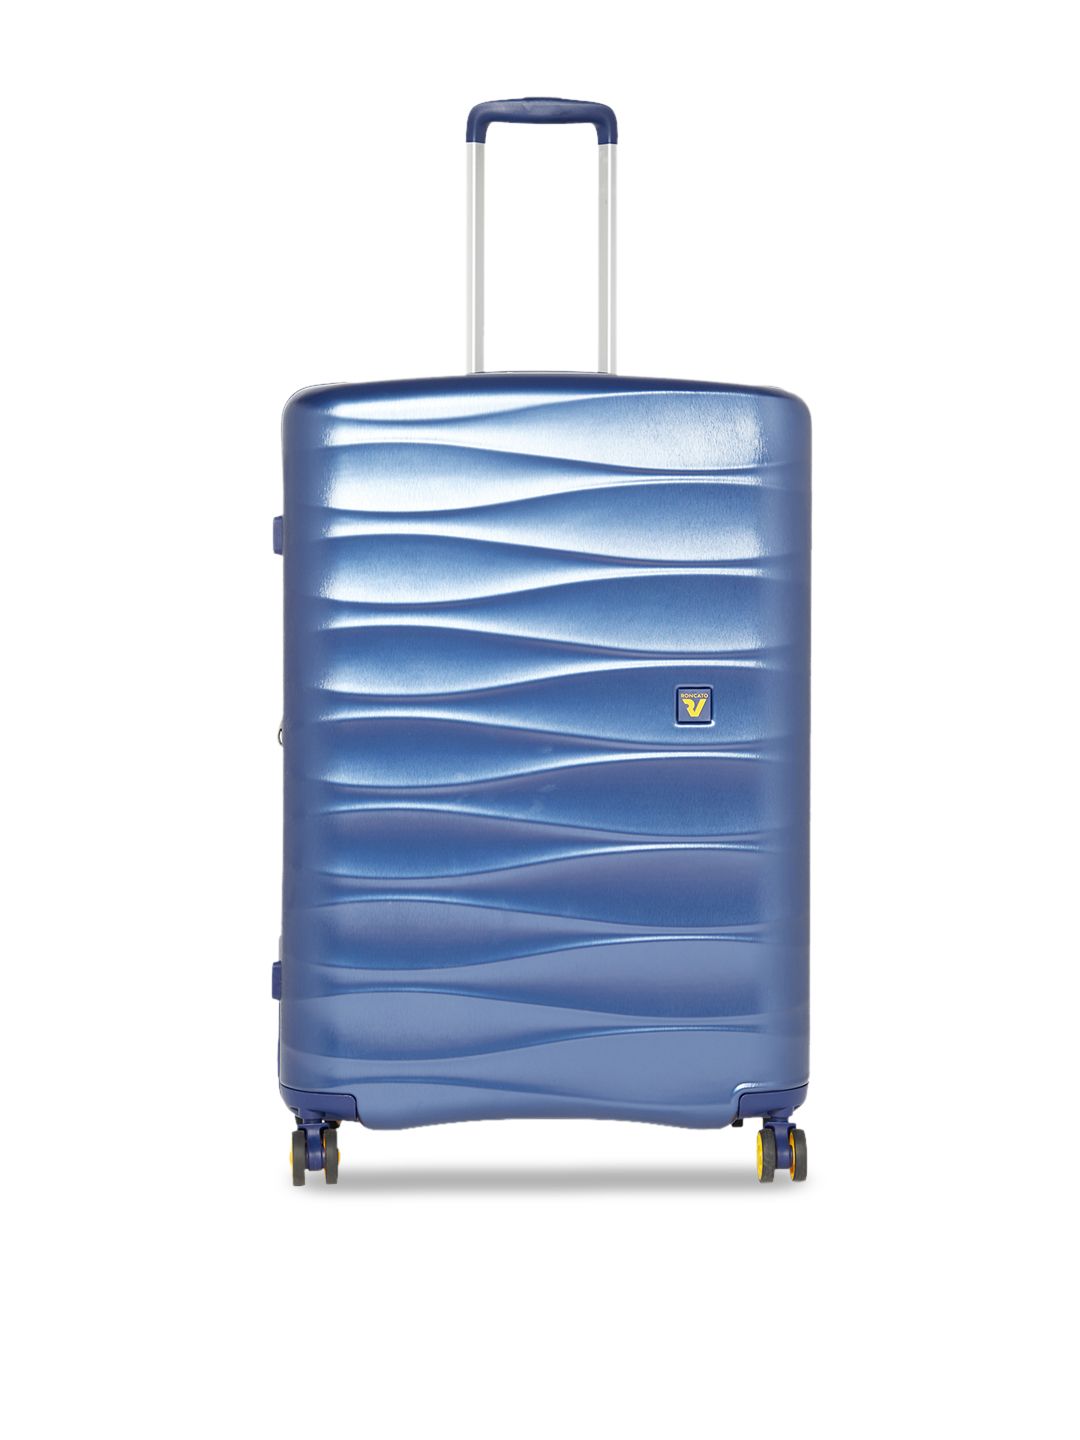 RONCATO Blue Textured Stellar Hard-Sided Notte Large Trolley Suitcase Price in India